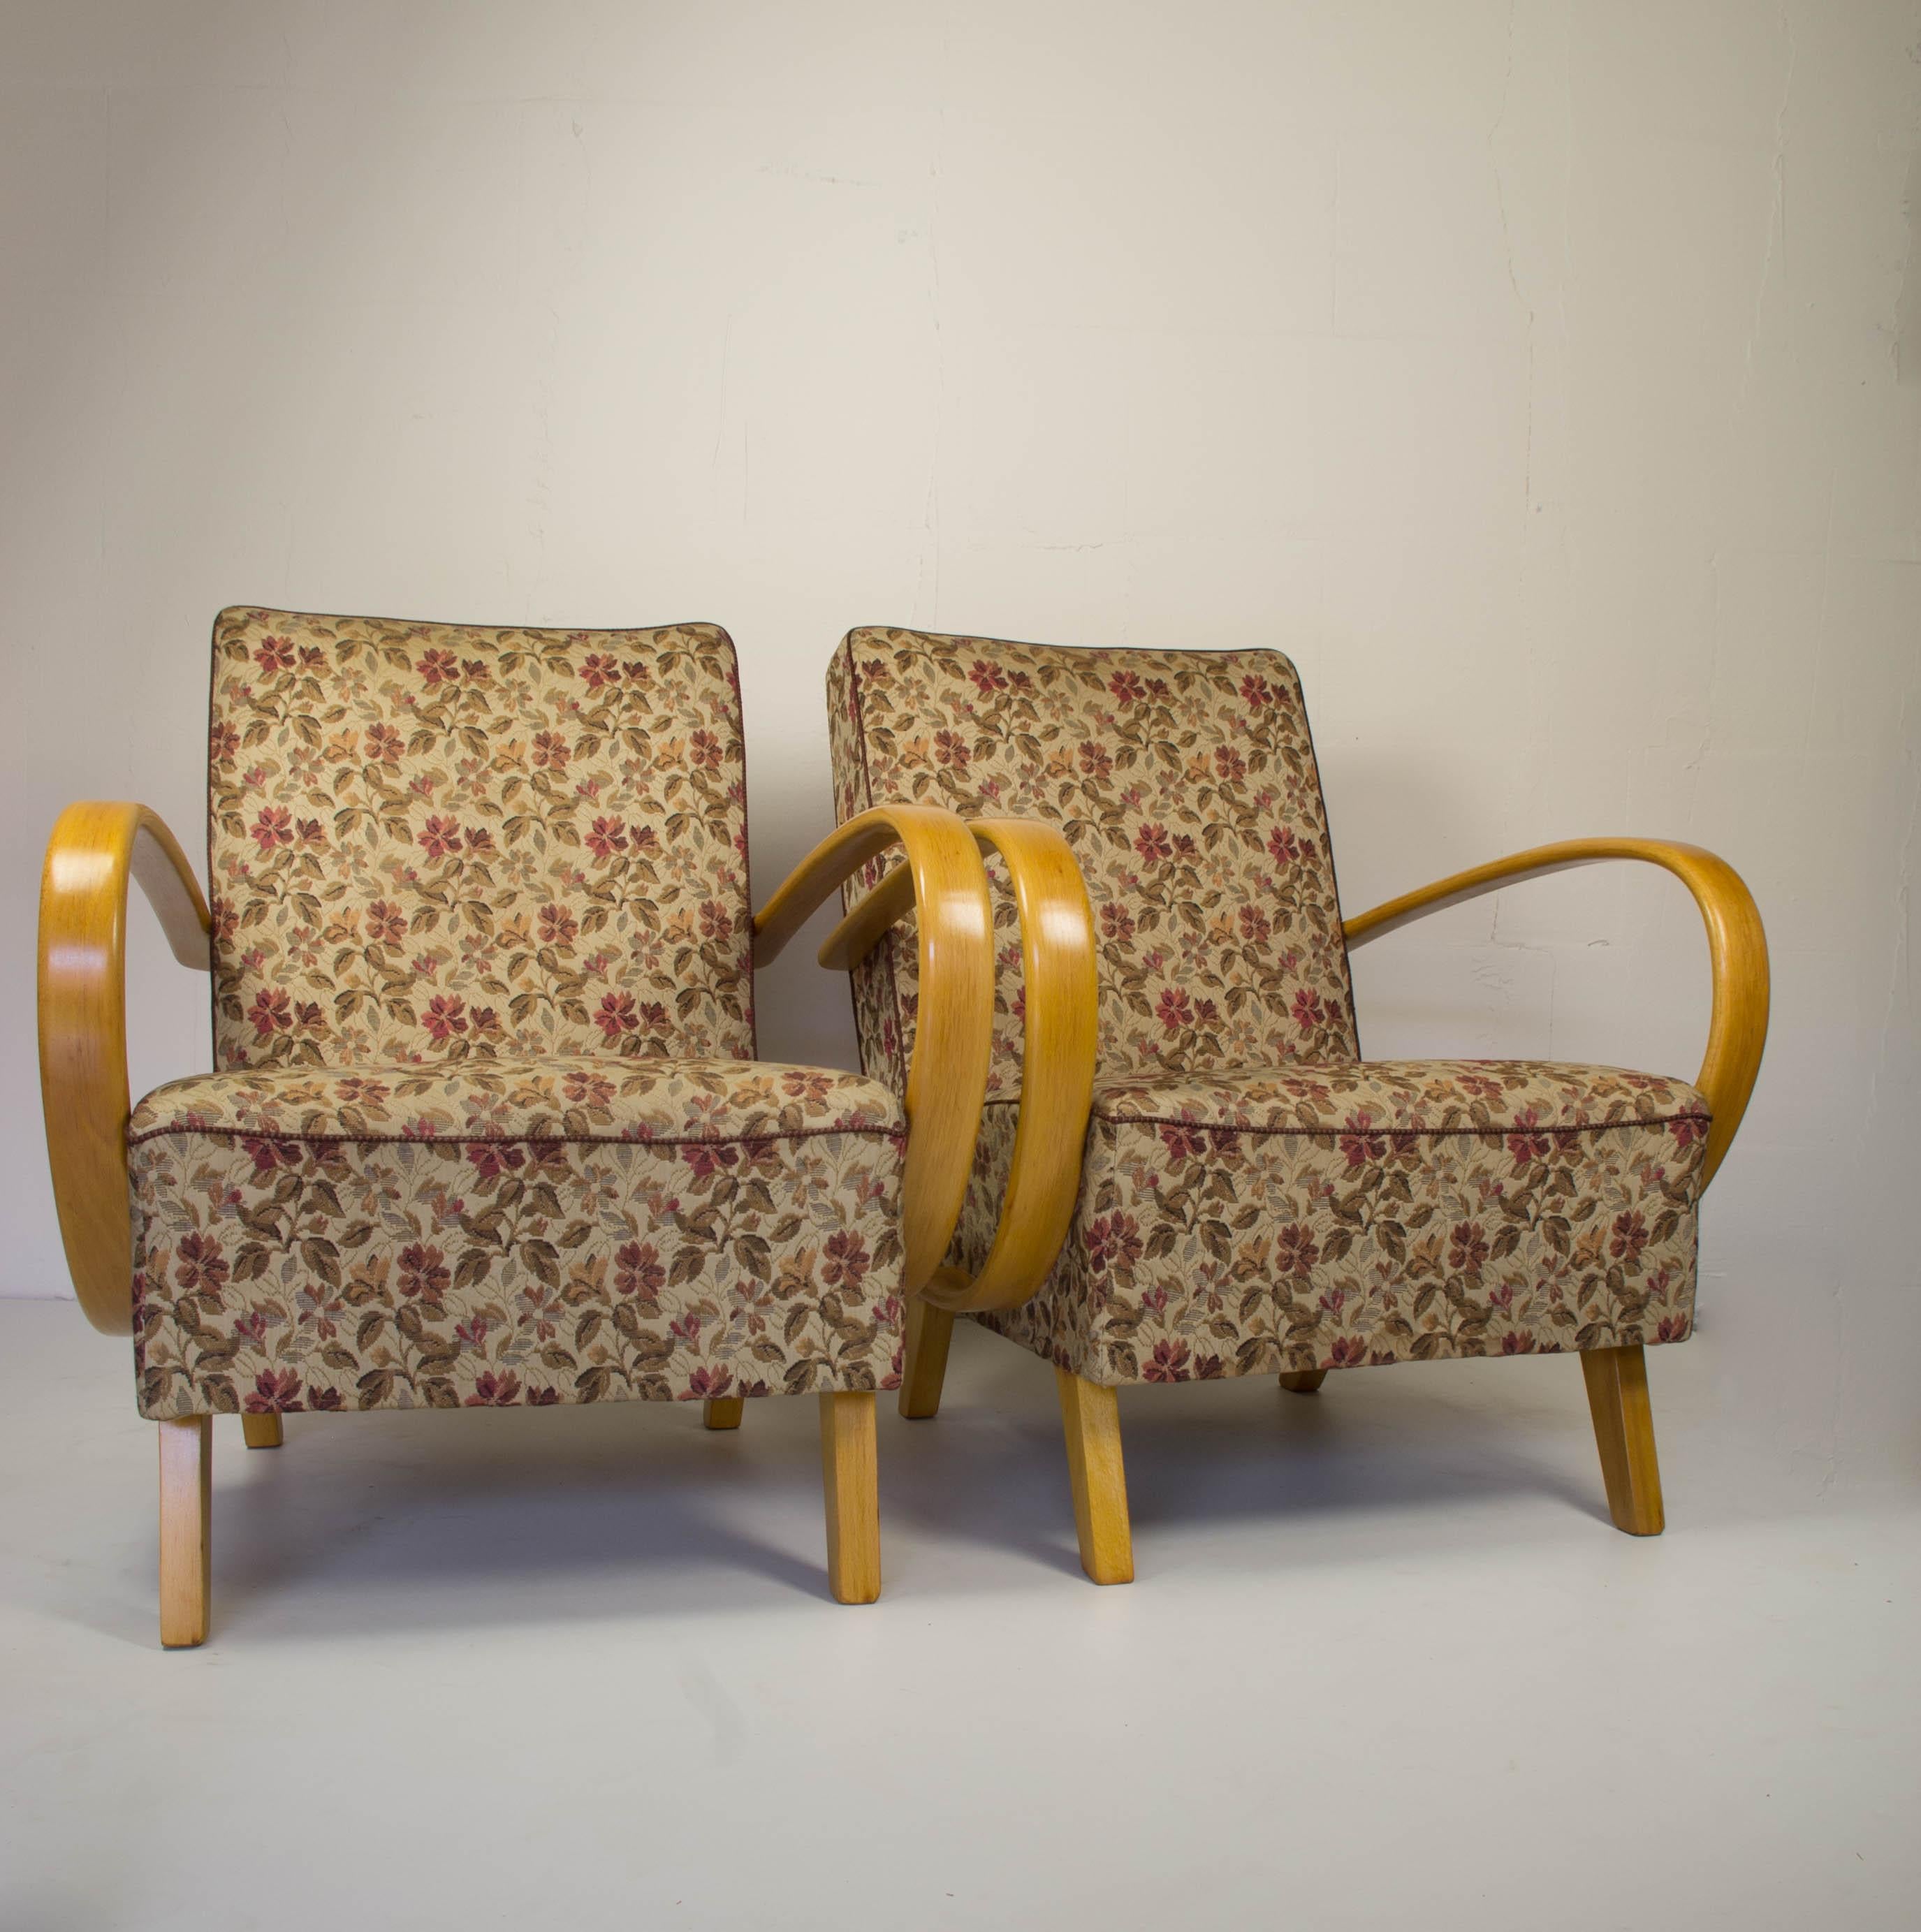 Original upholstery in good condition. Wooden parts restored. Solid construction. Very comfortable seating.